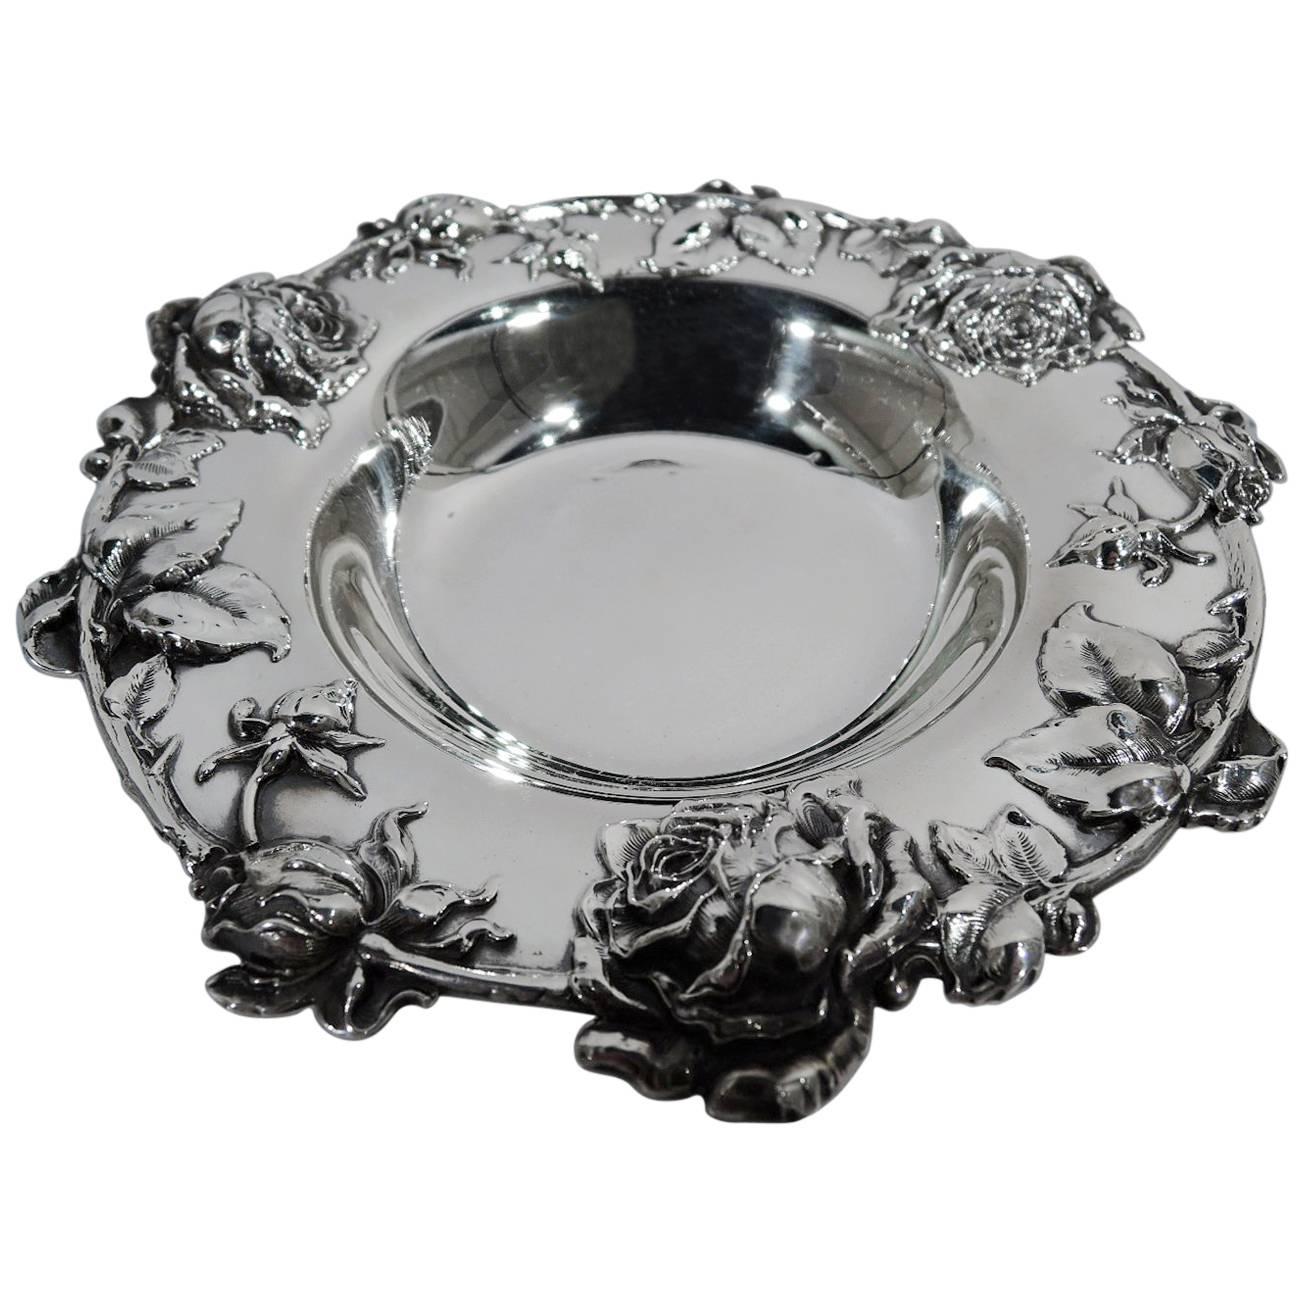 Antique American Sterling Silver Bowl with Roses